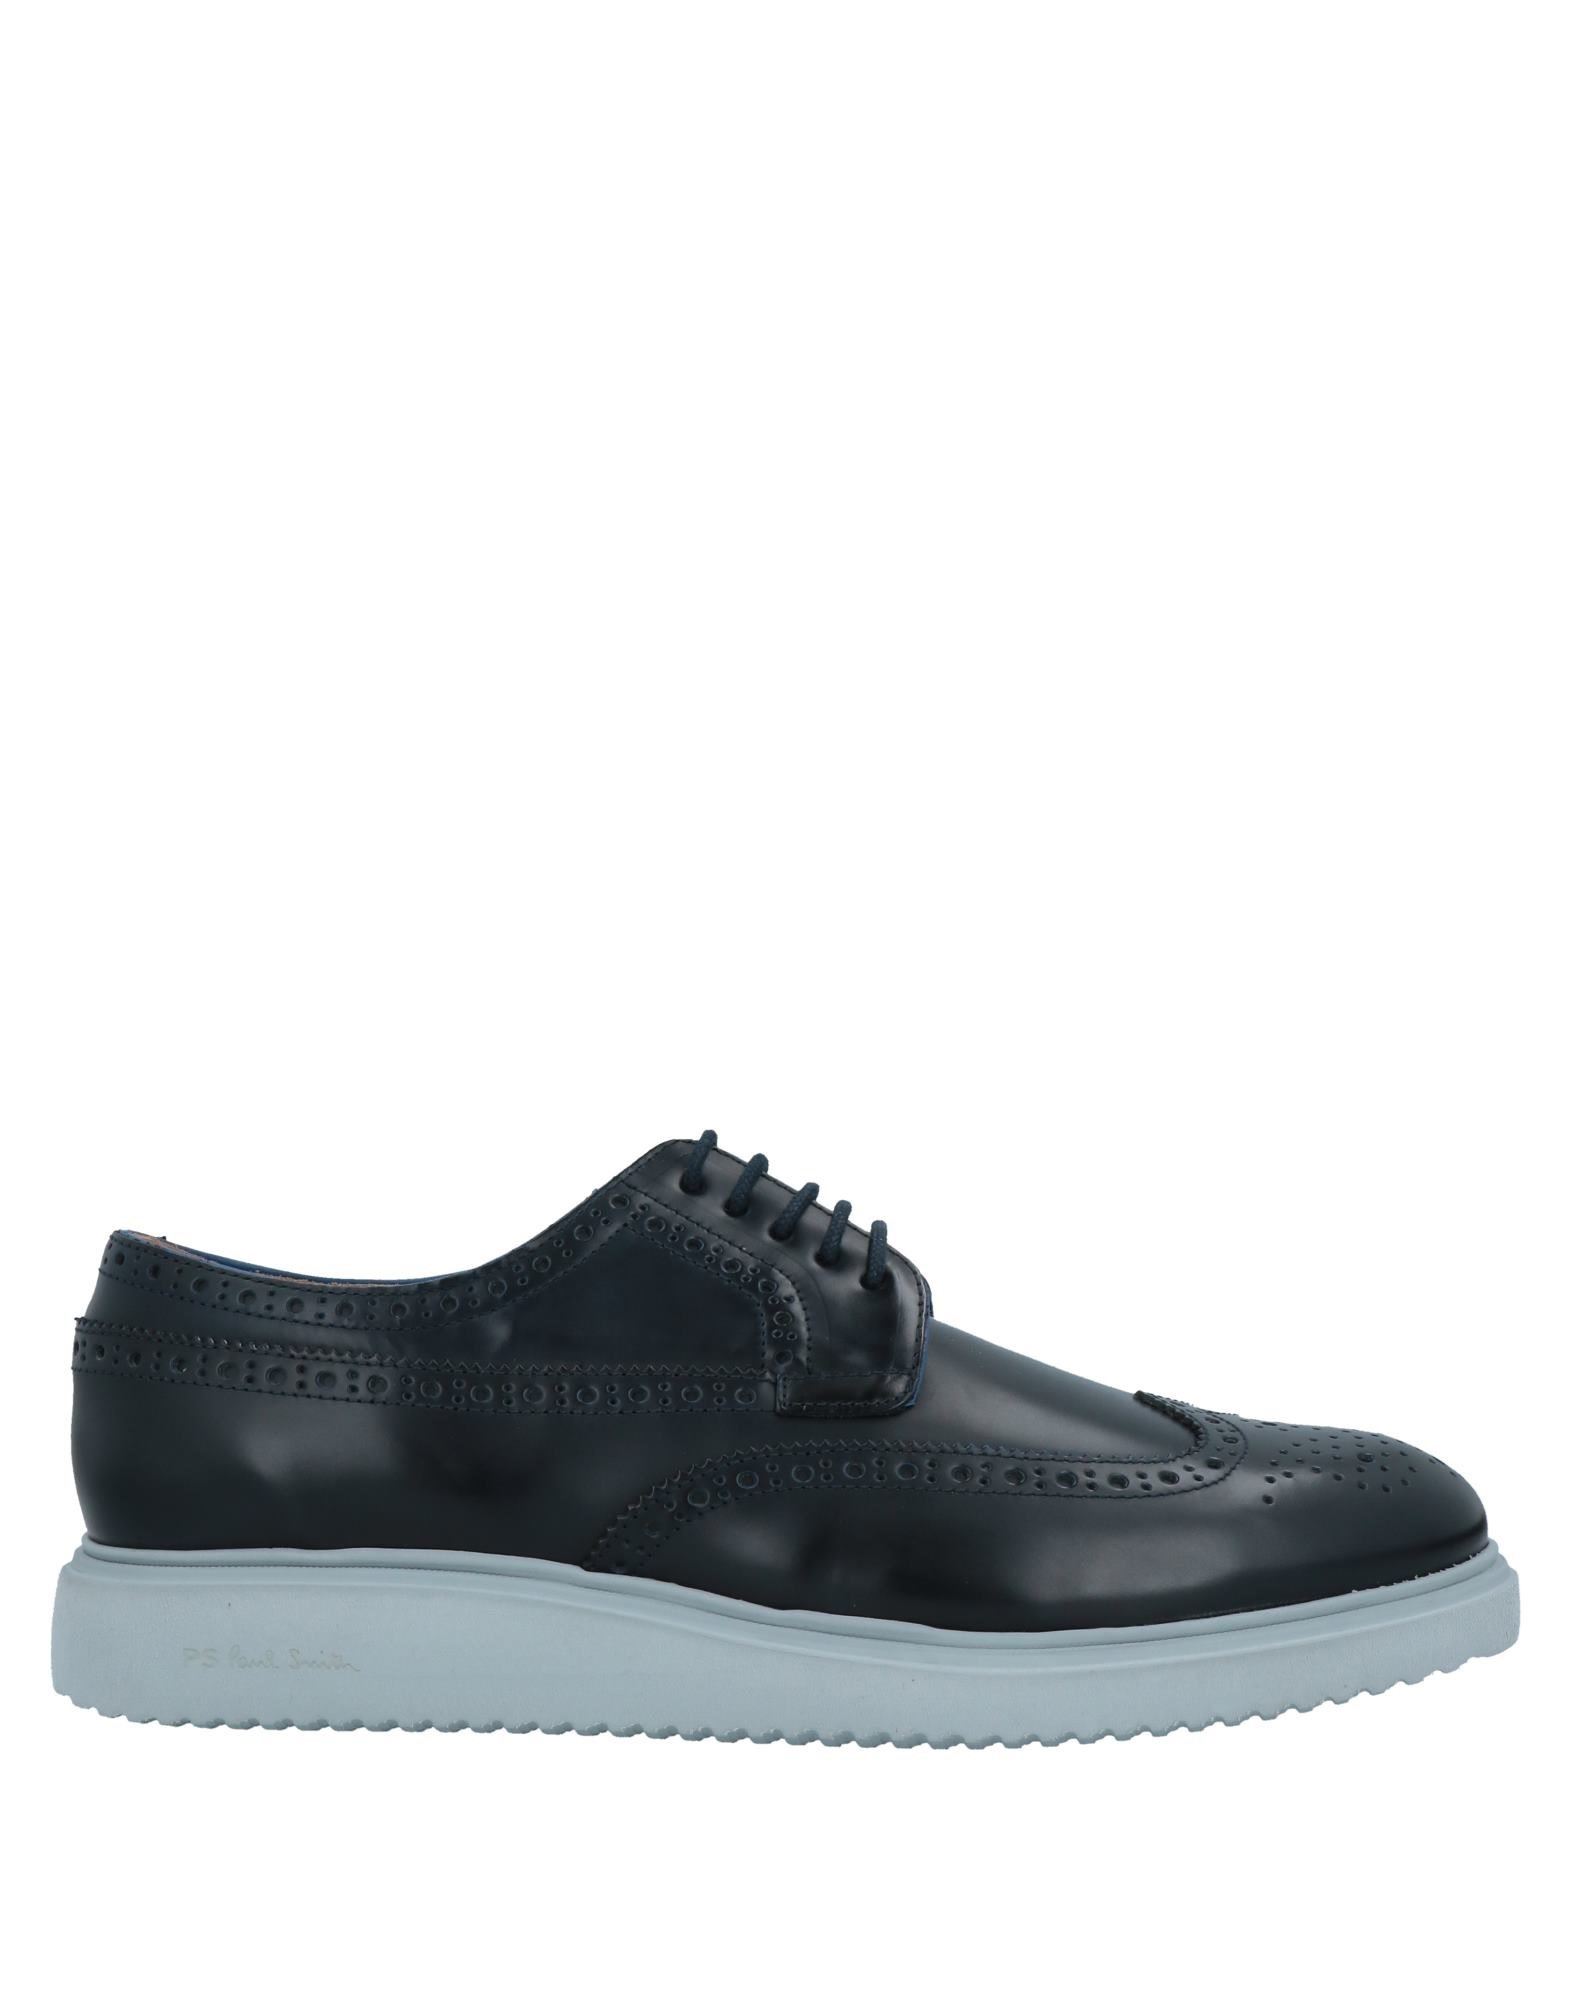 PS PAUL SMITH Lace-up shoes - Item 11992143